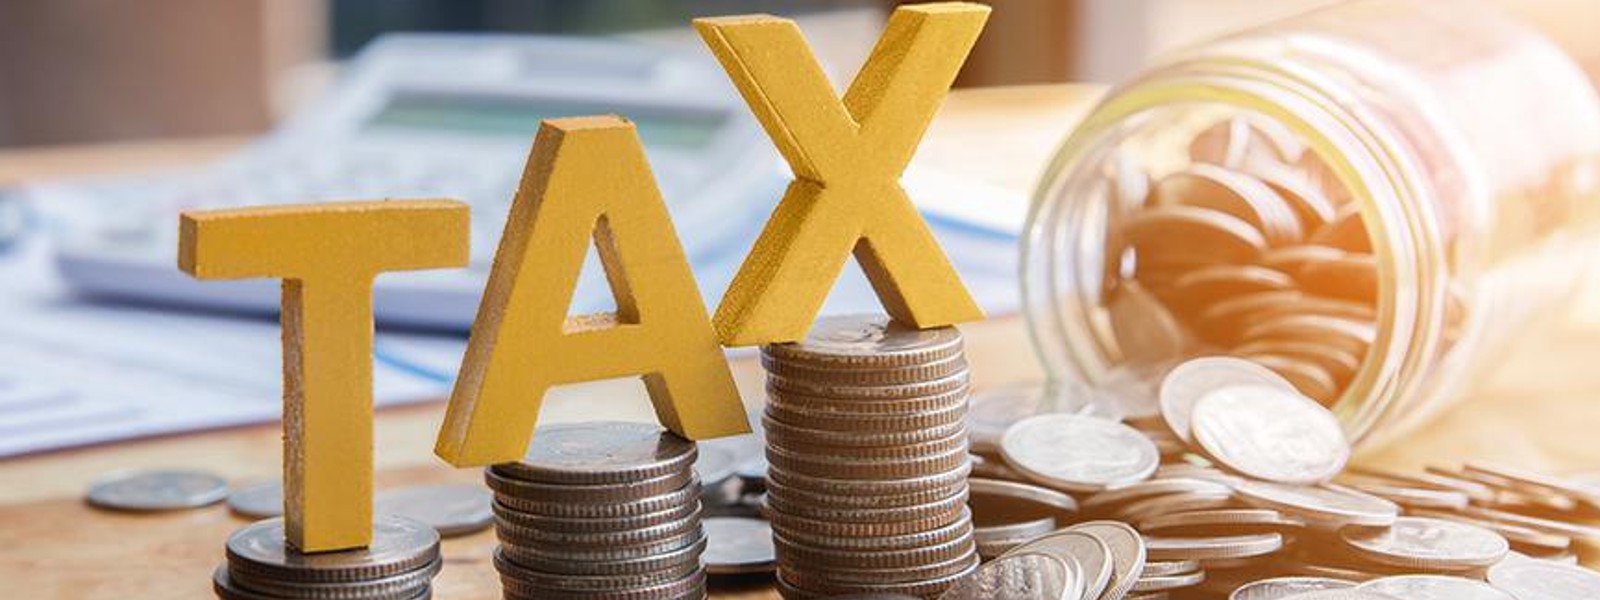 Ceylon Chamber of Commerce concerned over Surcharge Tax